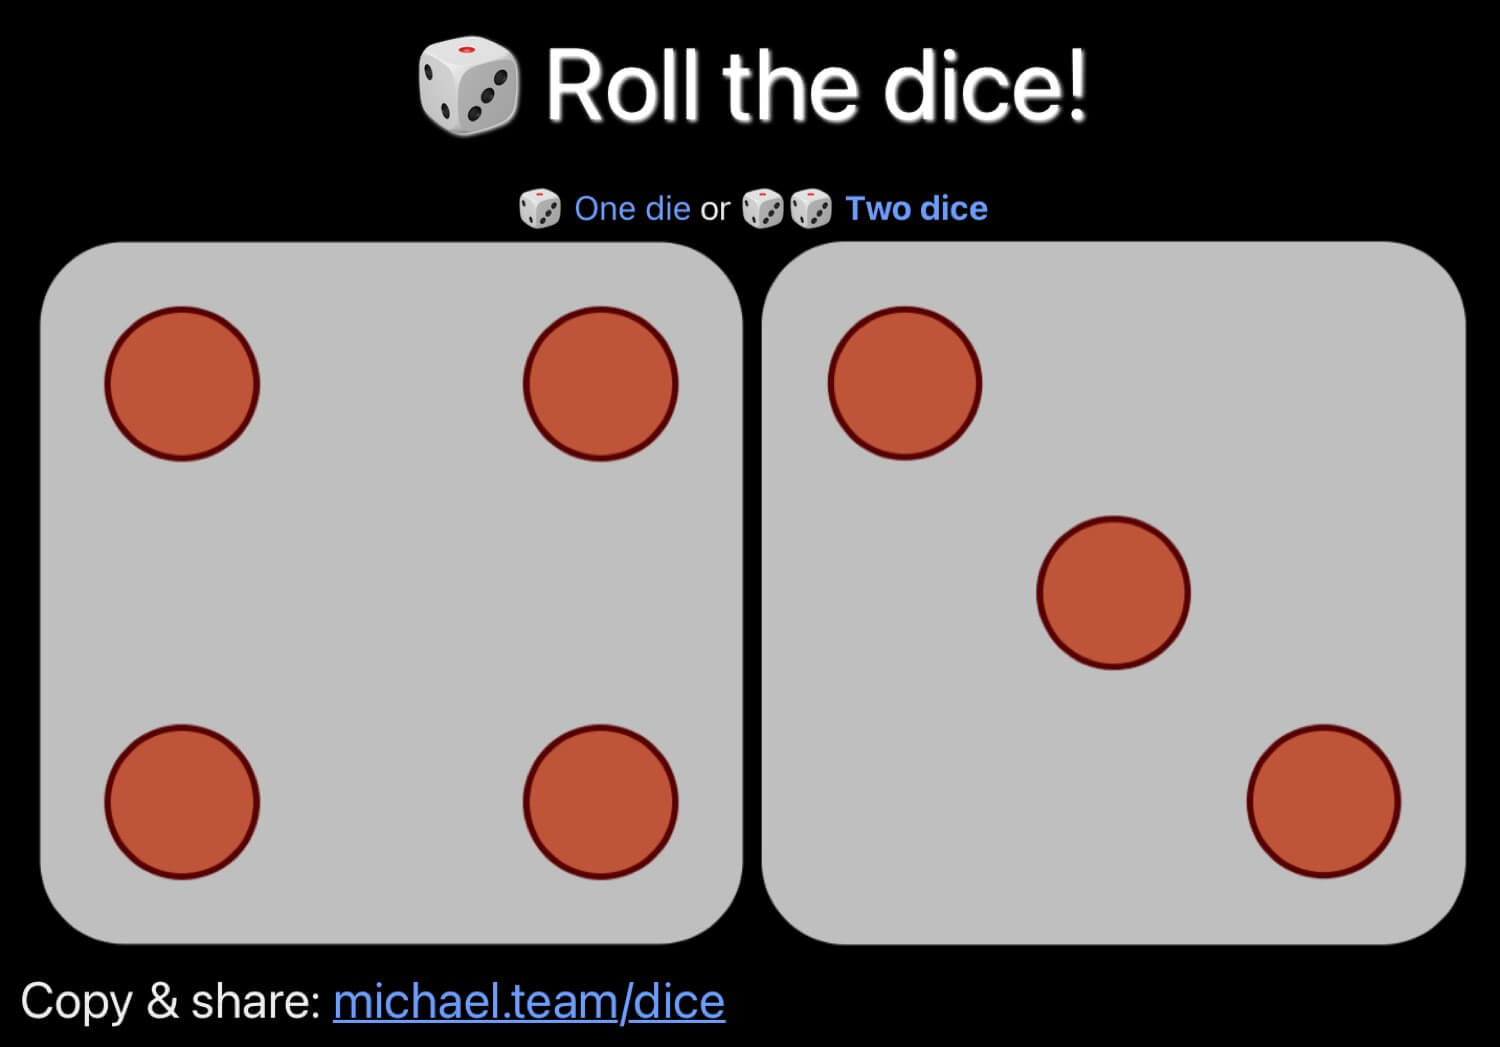 Rolling the virtual dice when playing board games! 🎲🎲